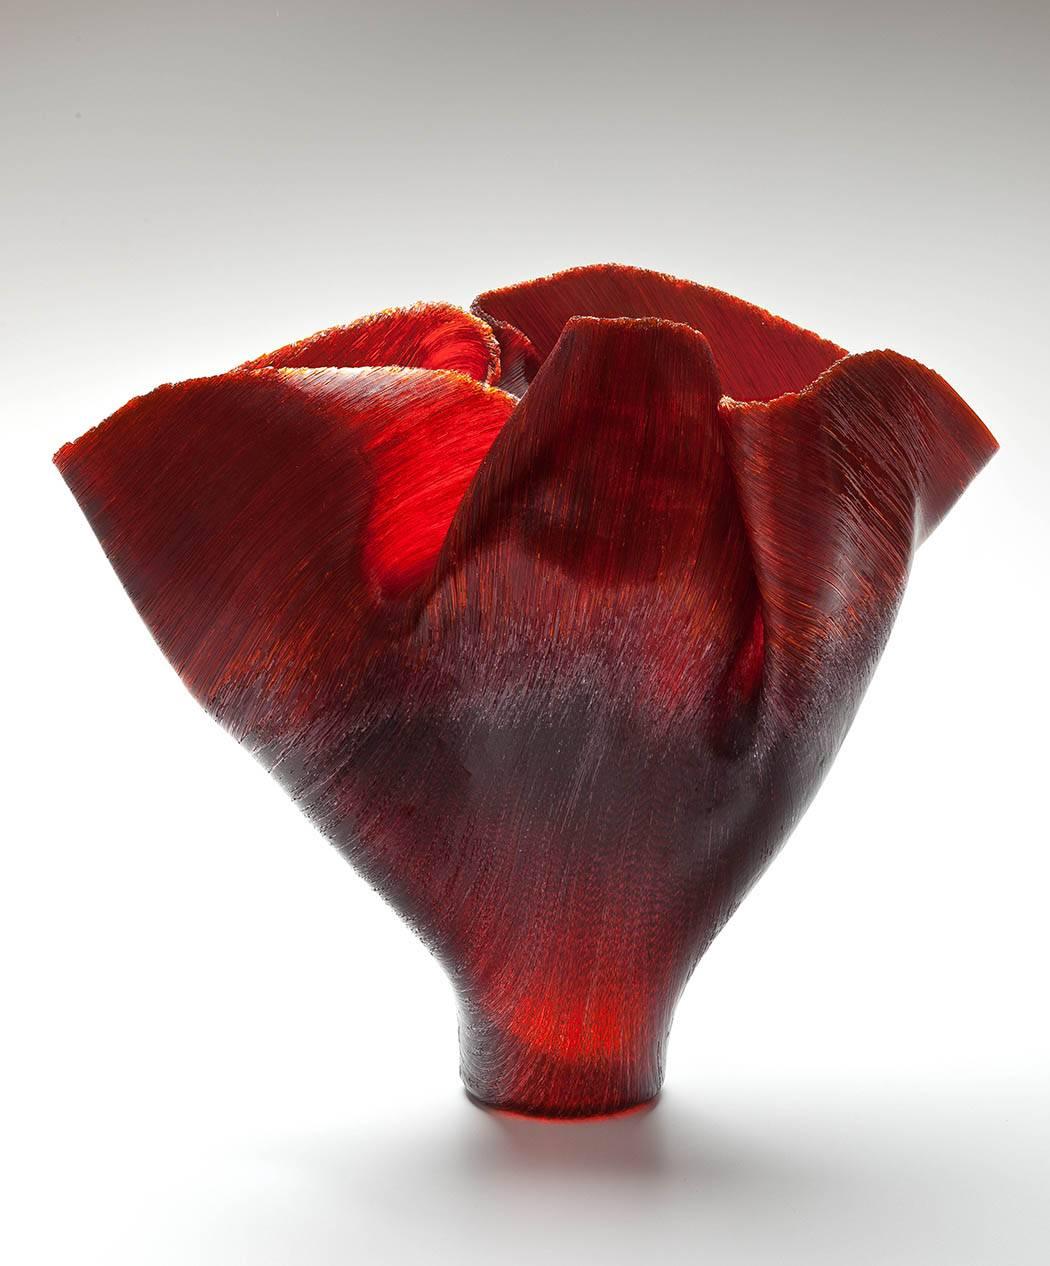 The vessel formed with hundreds of thousands of ombre red to warm black glass filament threads, fused uniquely within the kiln, and hand-pinched by Zynsky after the vessel is nearly complete. 

The works combines elements of material engineering,